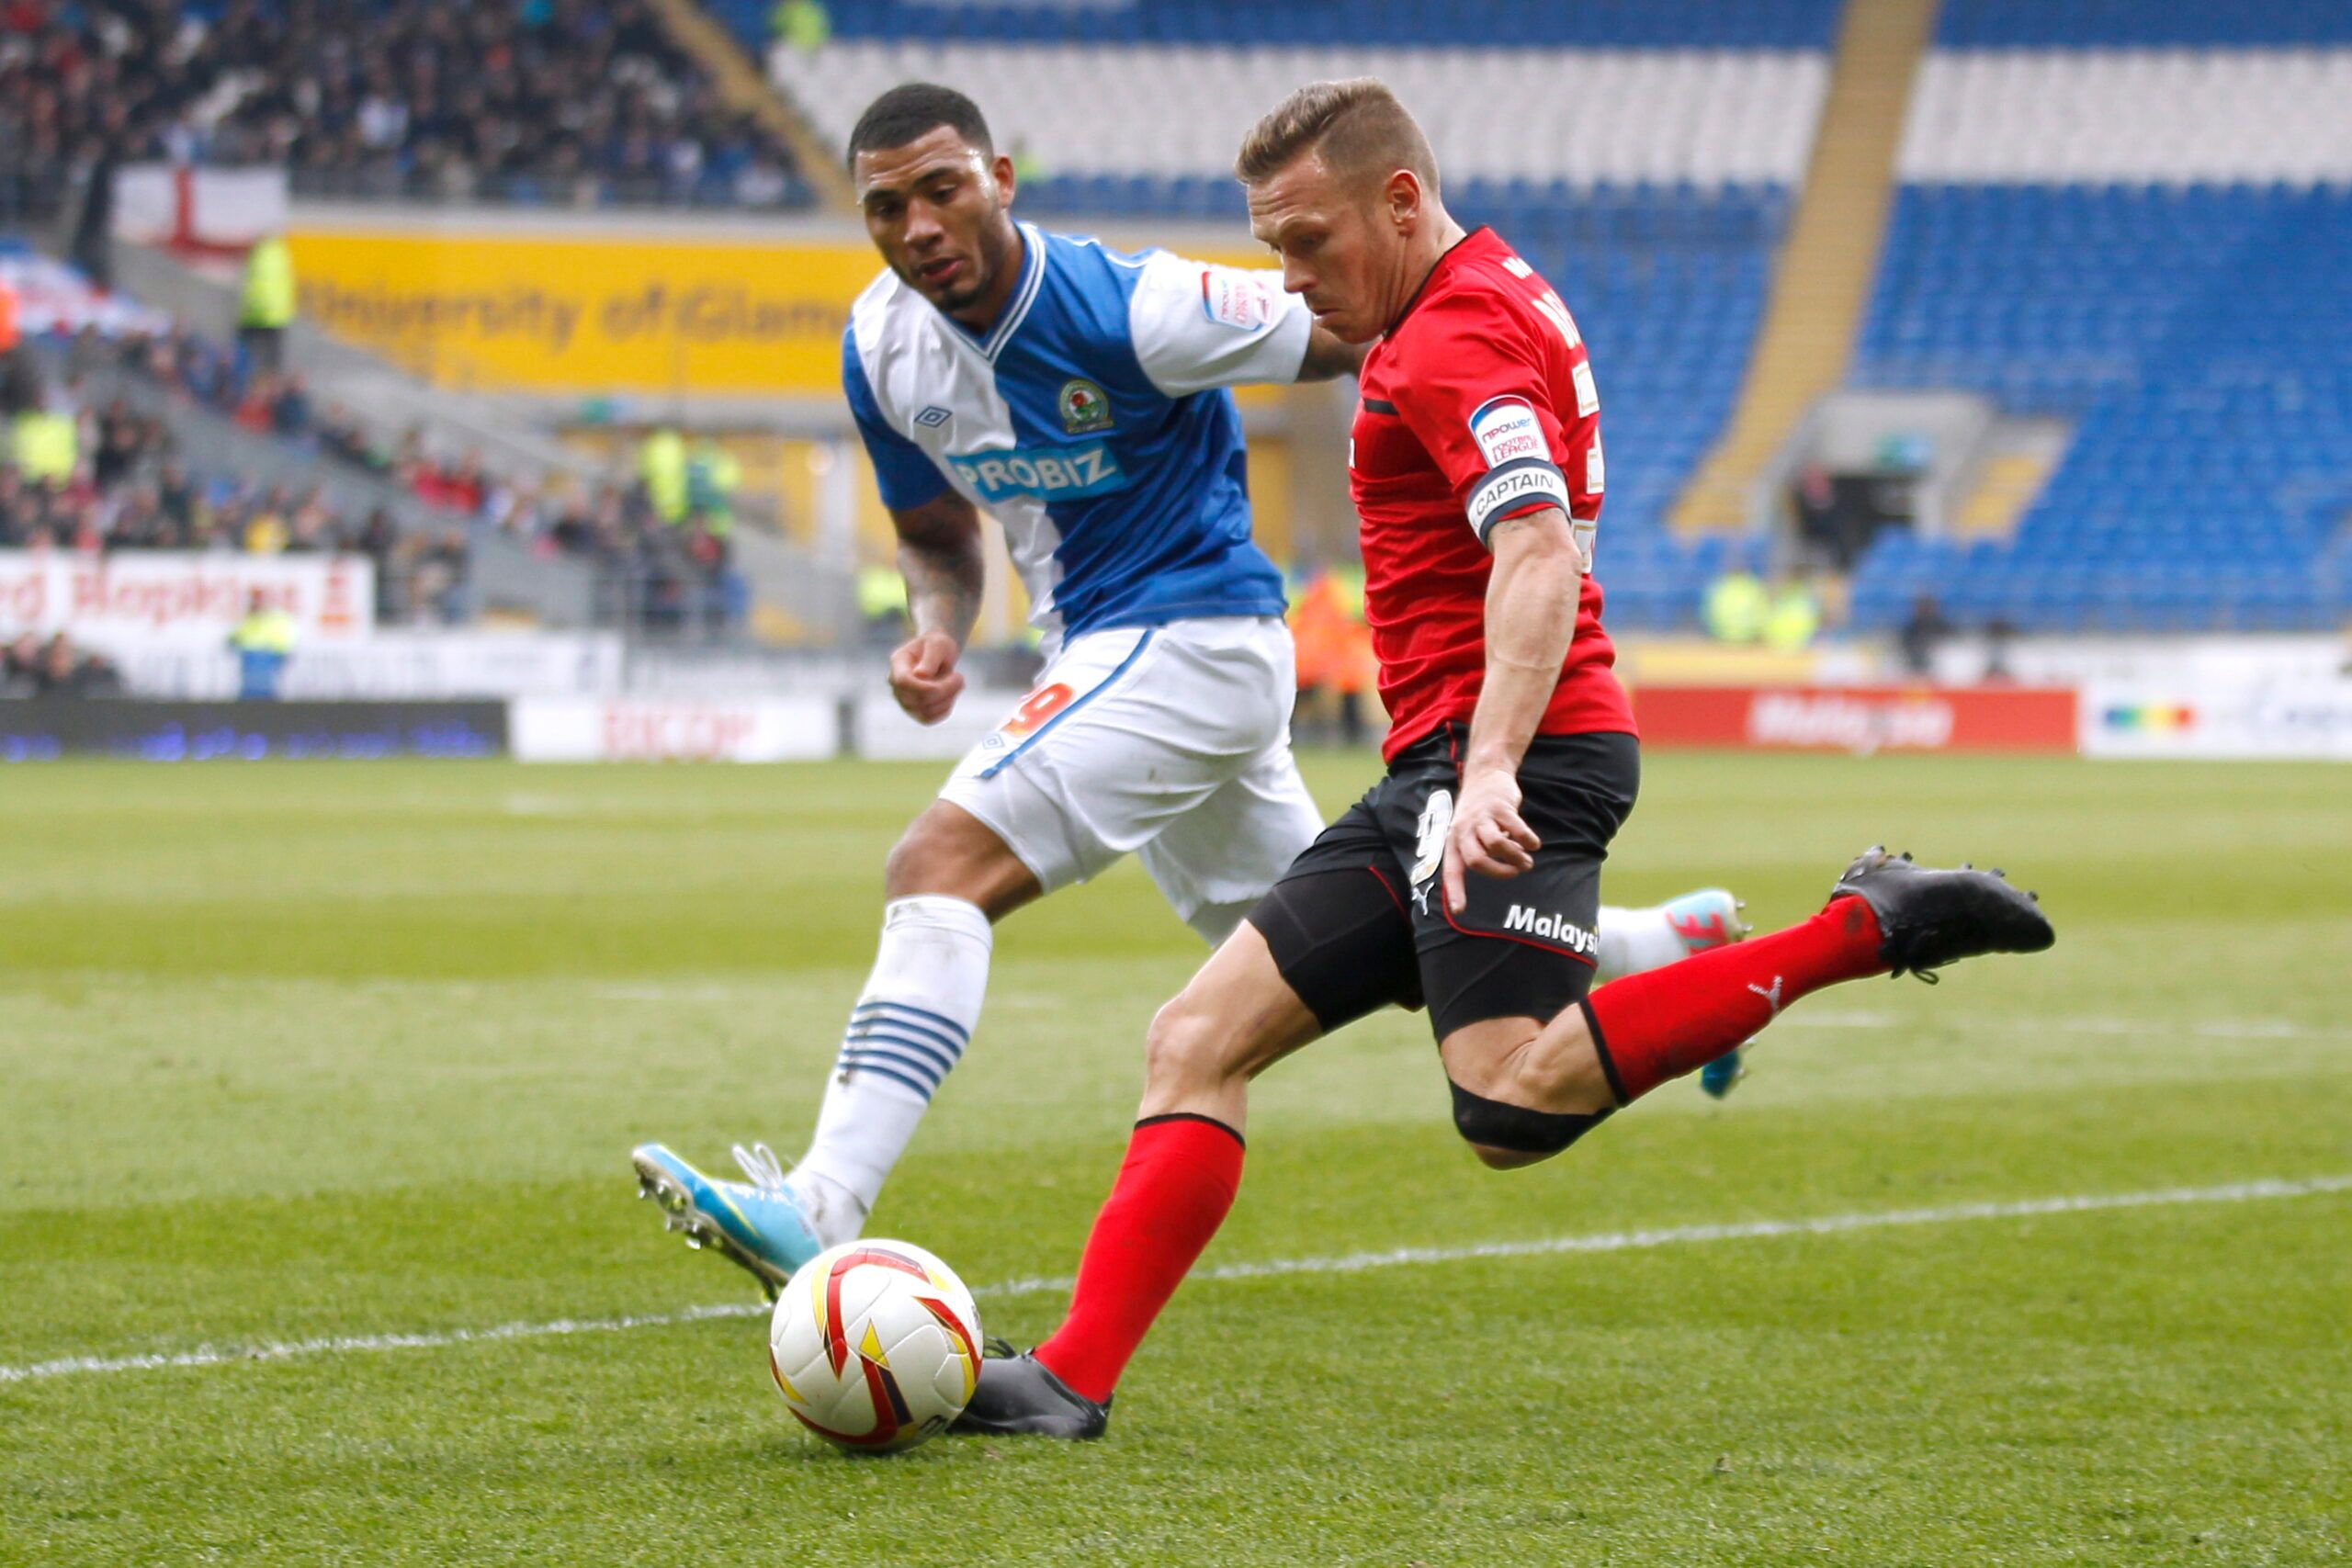 Football - Cardiff City v Blackburn Rovers - npower Football League Championship  - Cardiff City Stadium  - 12/13 - 1/4/13 
Cardiff City's Craig Bellamy in action against Blackburn's Colin Kazim Richards 
Mandatory Credit: Action Images / Paul Harding 
EDITORIAL USE ONLY. No use with unauthorized audio, video, data, fixture lists, club/league logos or live services. Online in-match use limited to 45 images, no video emulation. No use in betting, games or single club/league/player publications.  